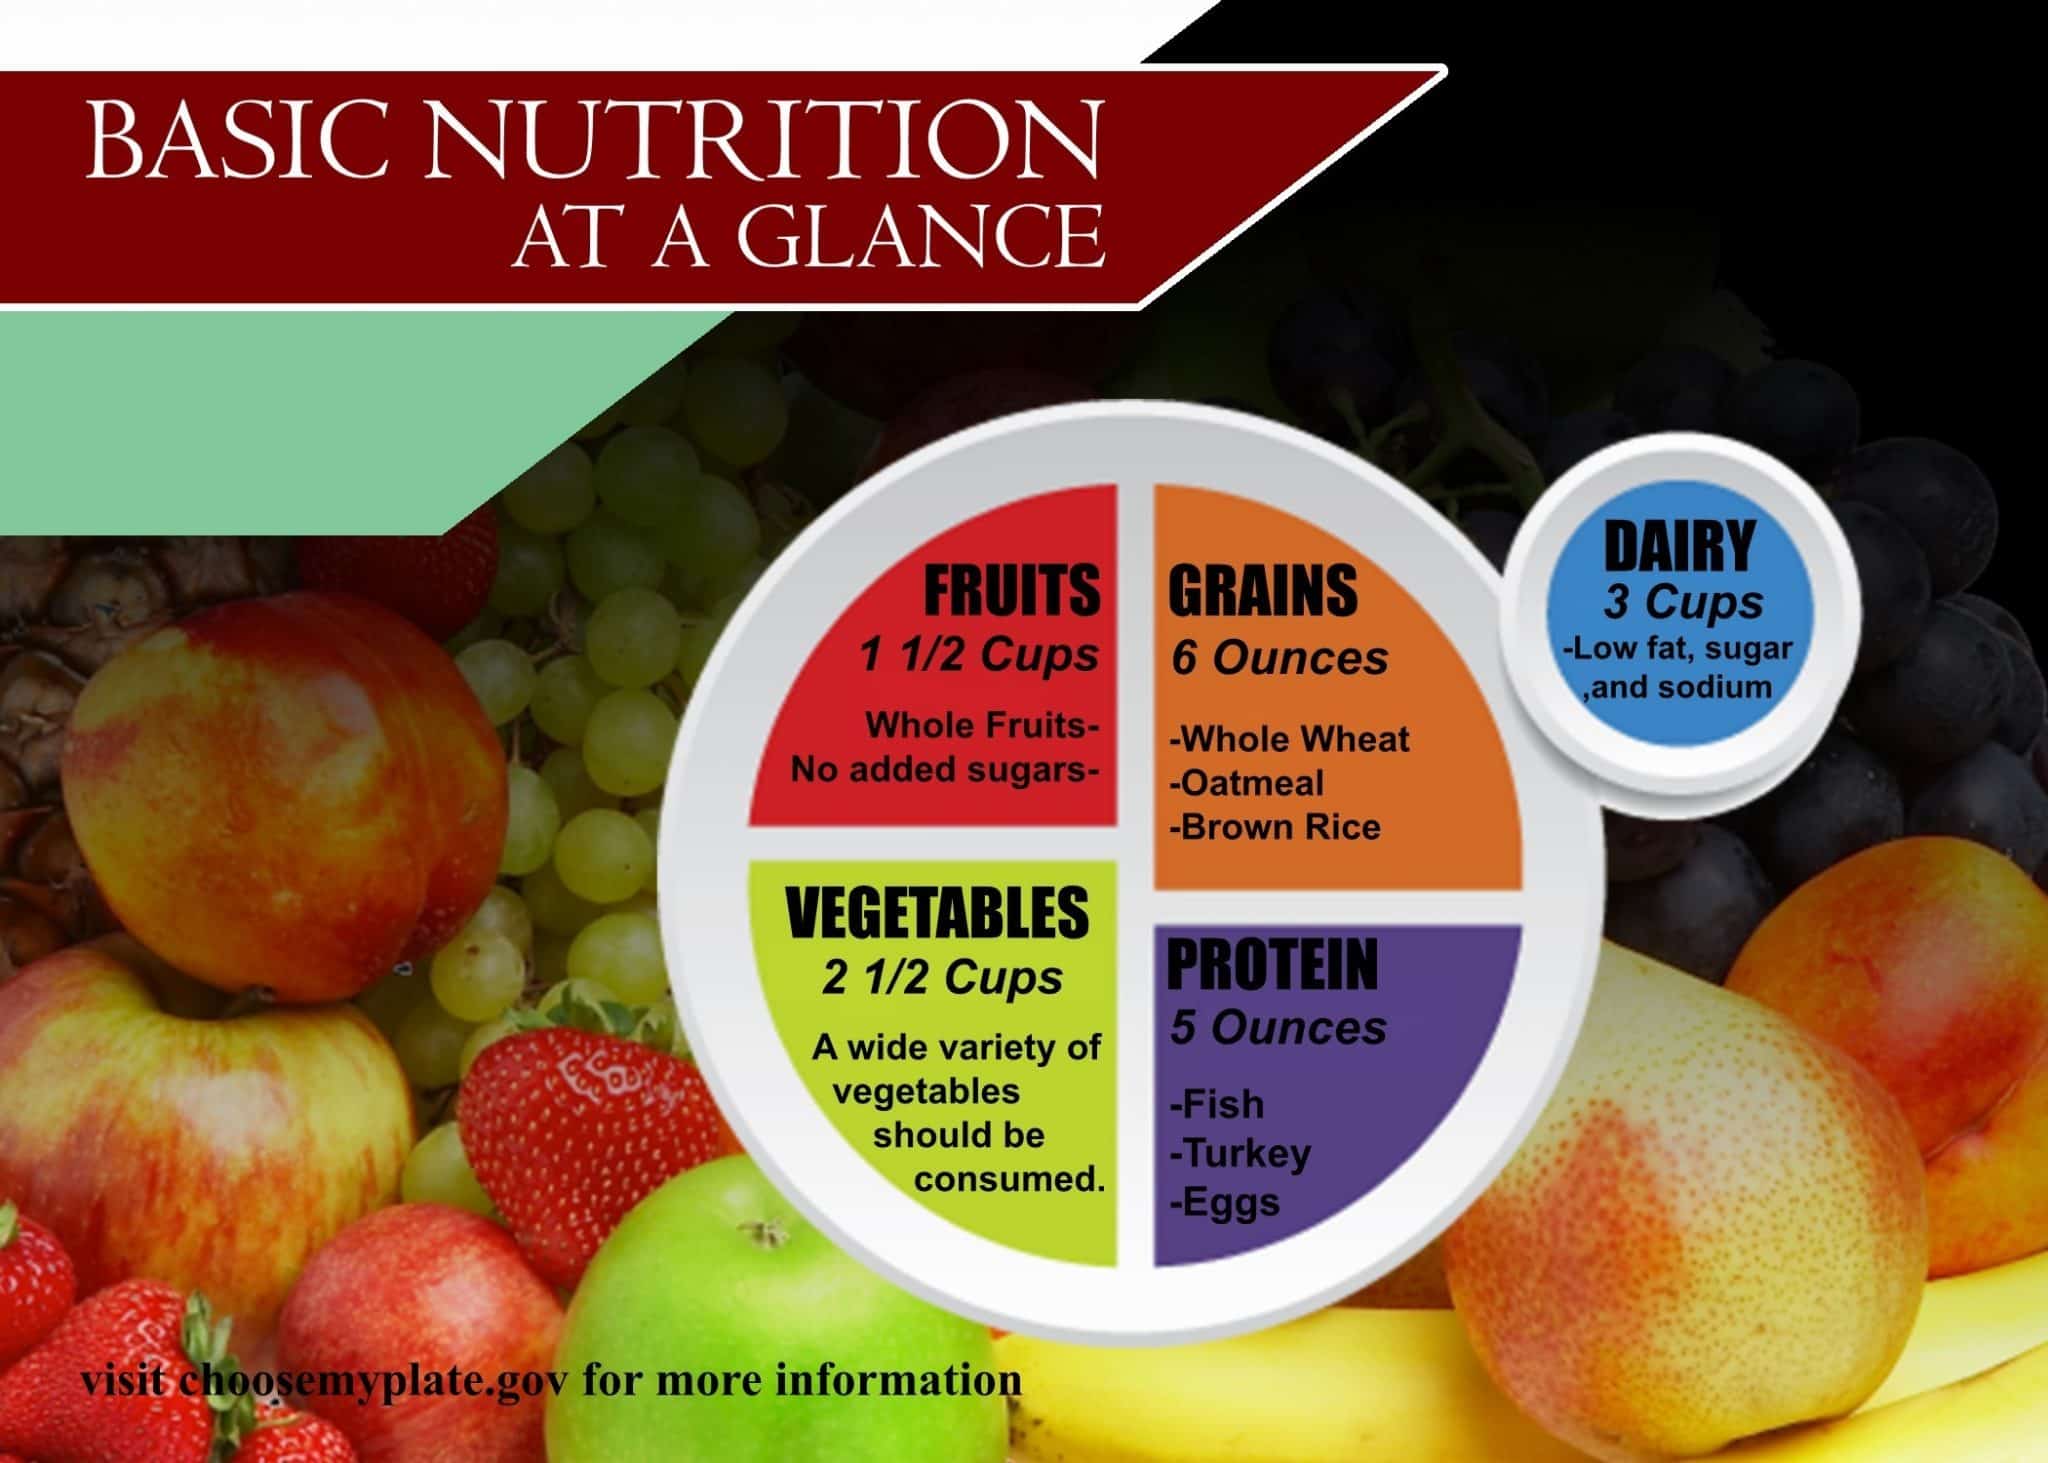 Nutrition for hot weather running - 
Basic Nutrition at Glance: Fruits, Grains. Vegetables, Protein